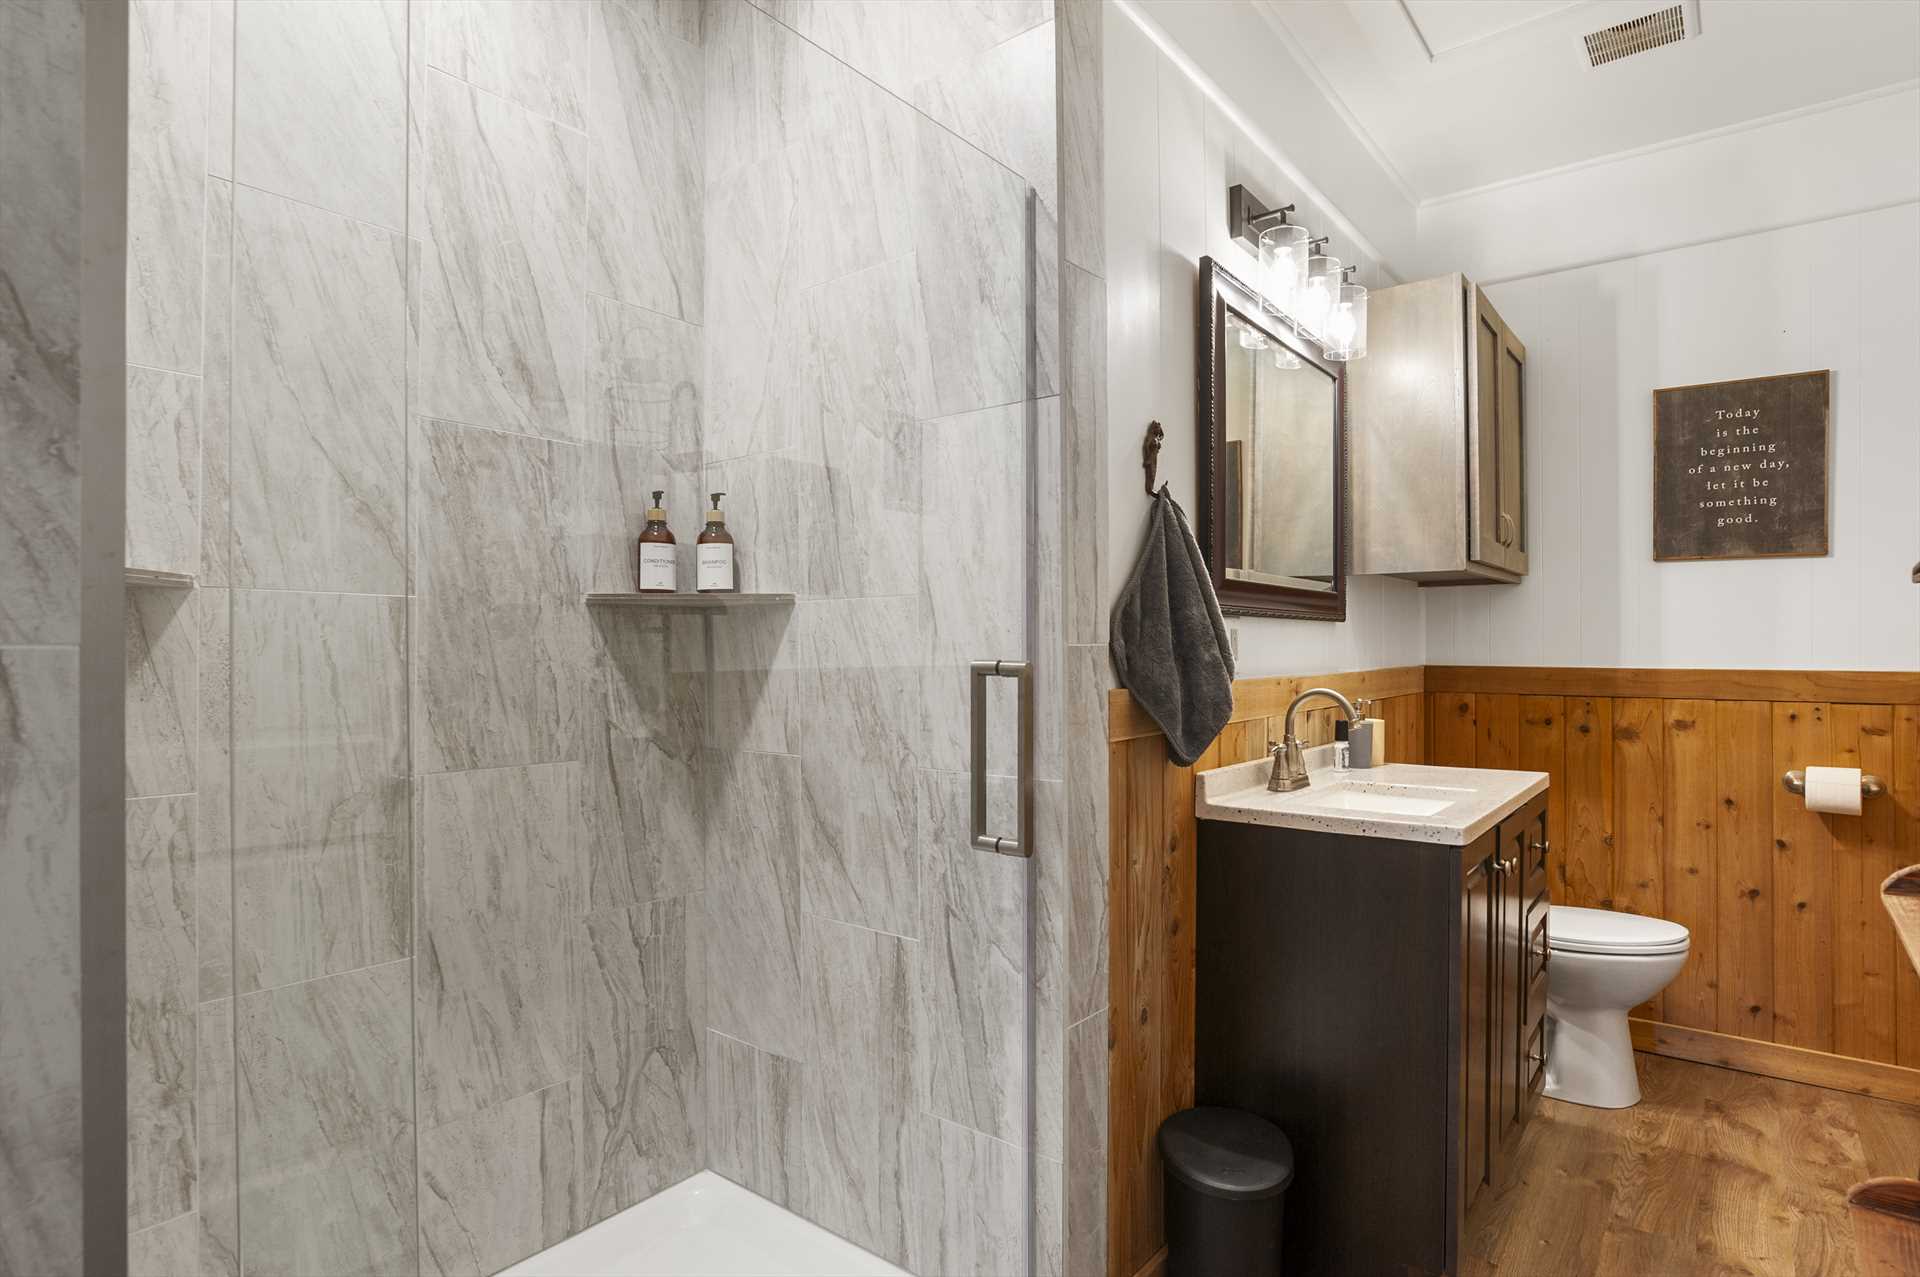                                                 Both bedrooms at A Place on Pecan have an accompanying full bath with roomy glass-walled shower stalls!